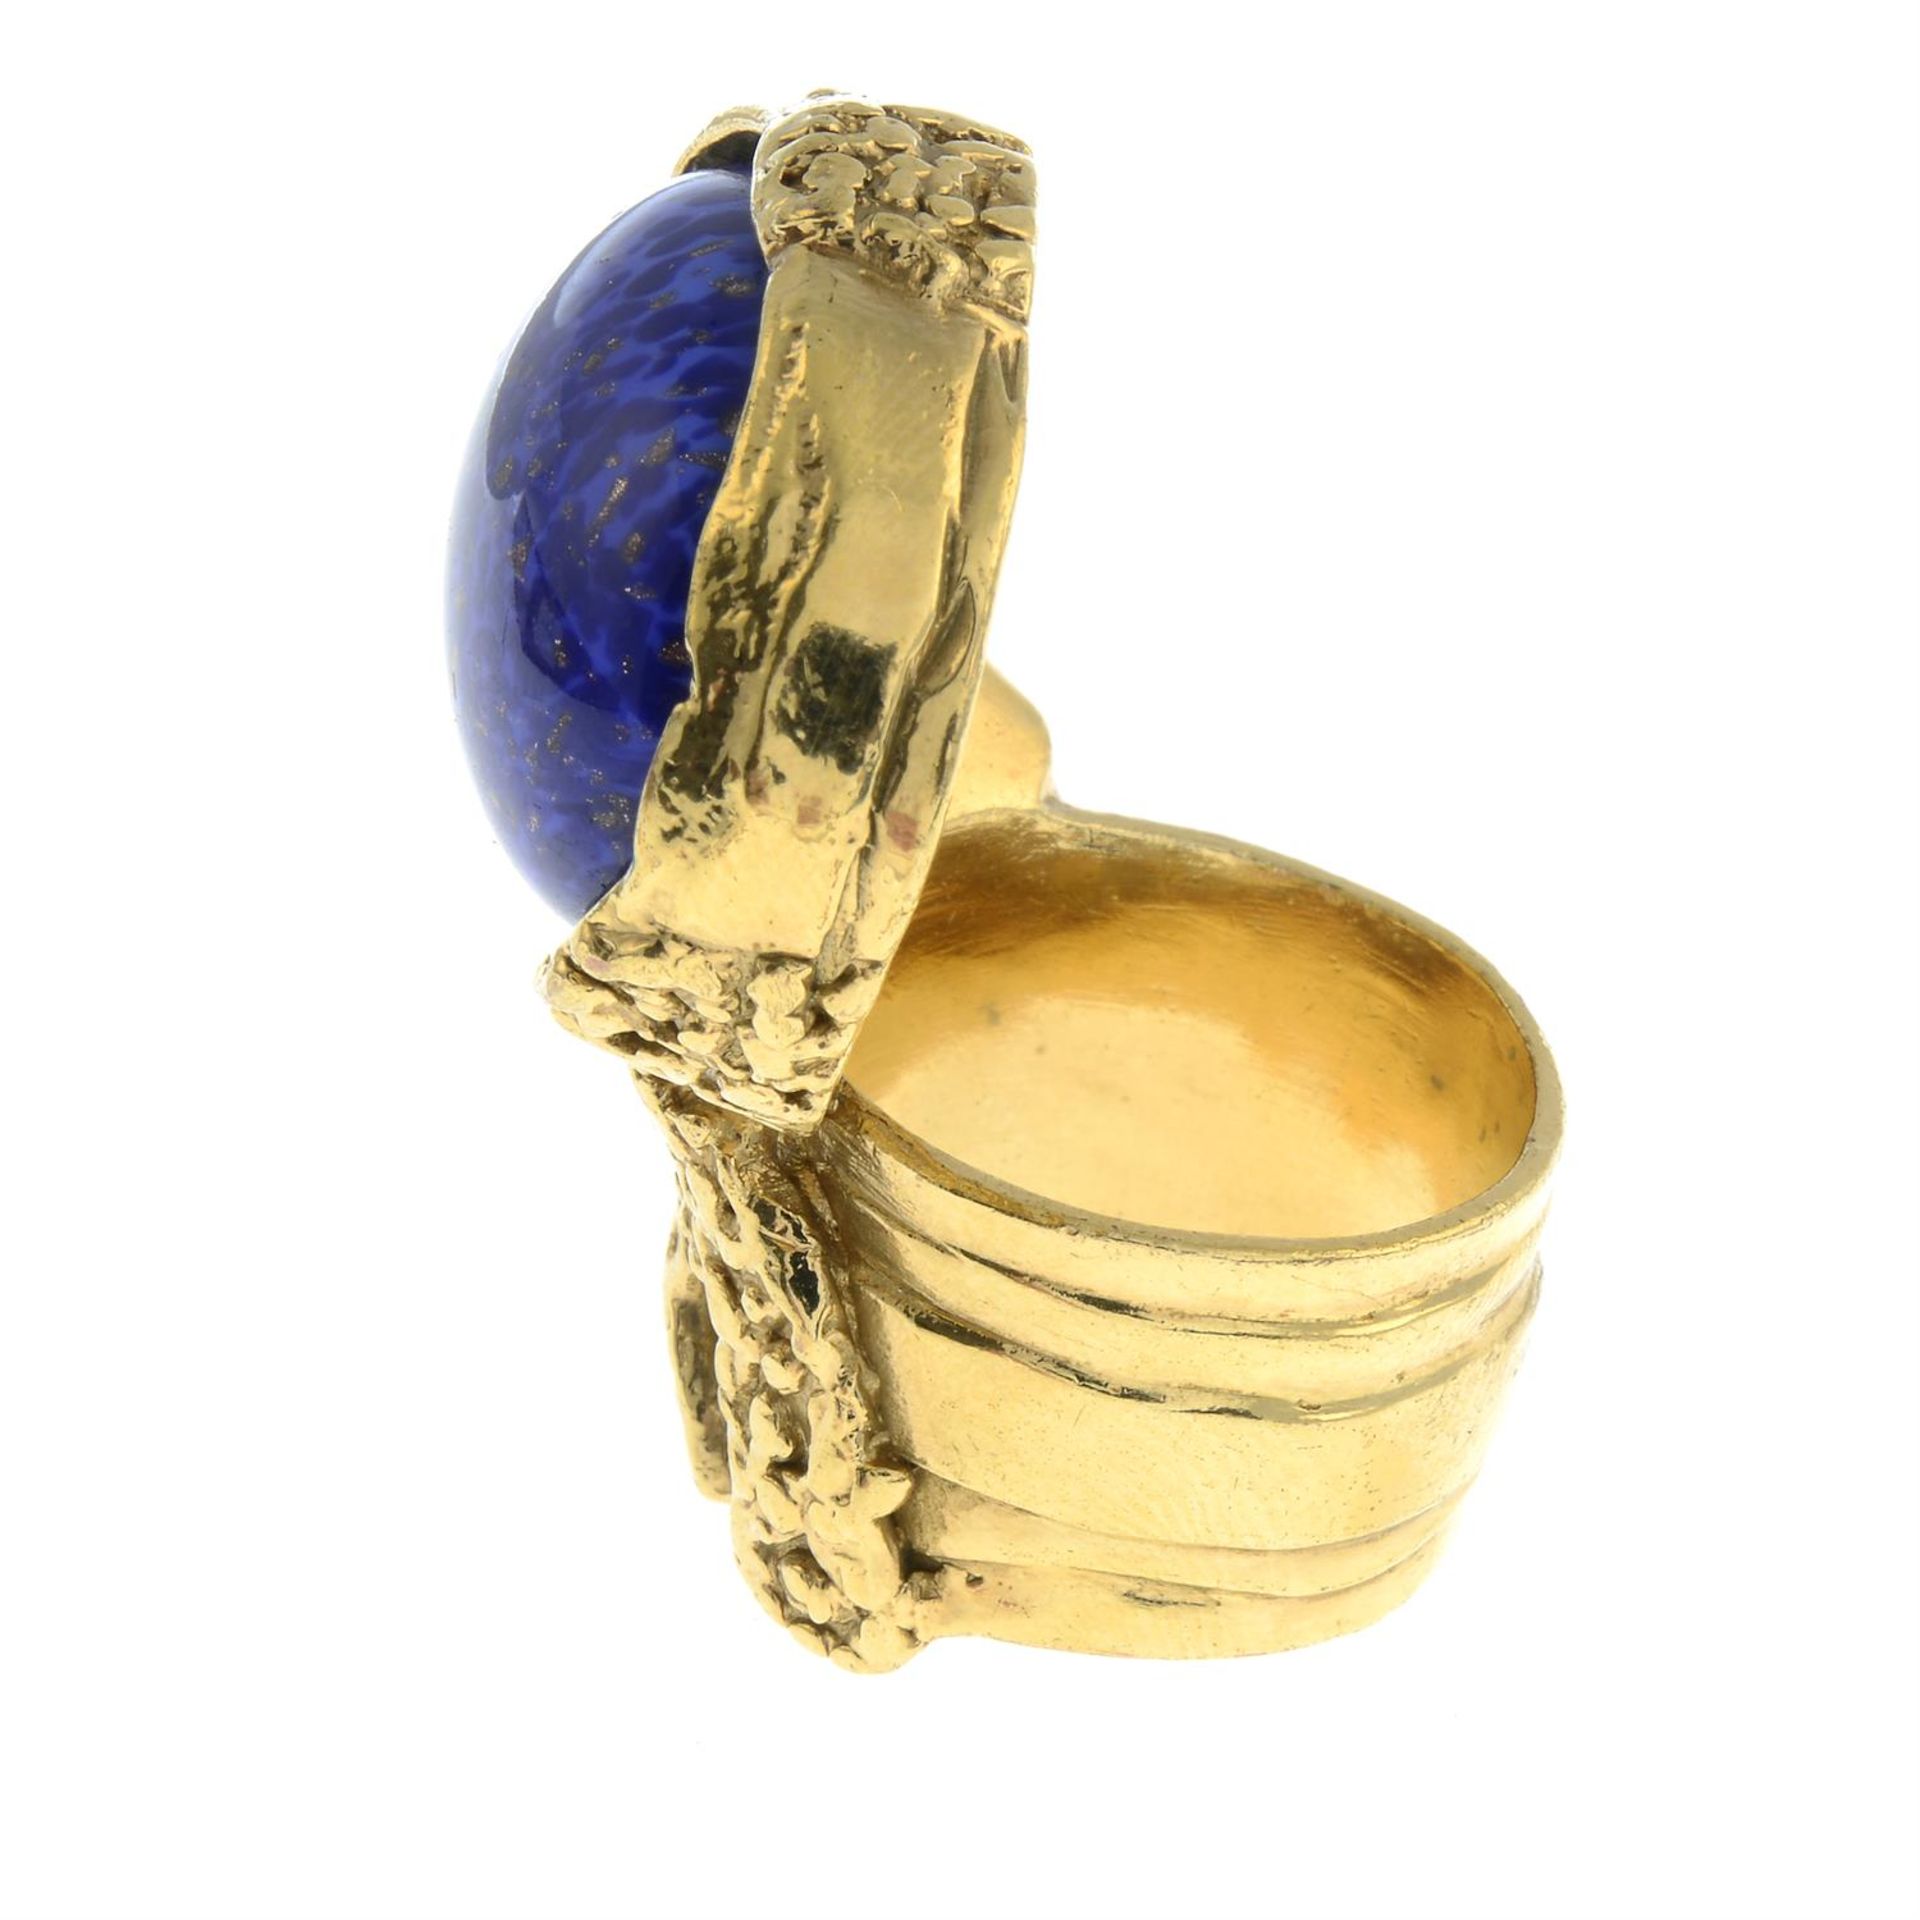 YVES SAINT LAURENT - an Arty ring. - Image 2 of 3